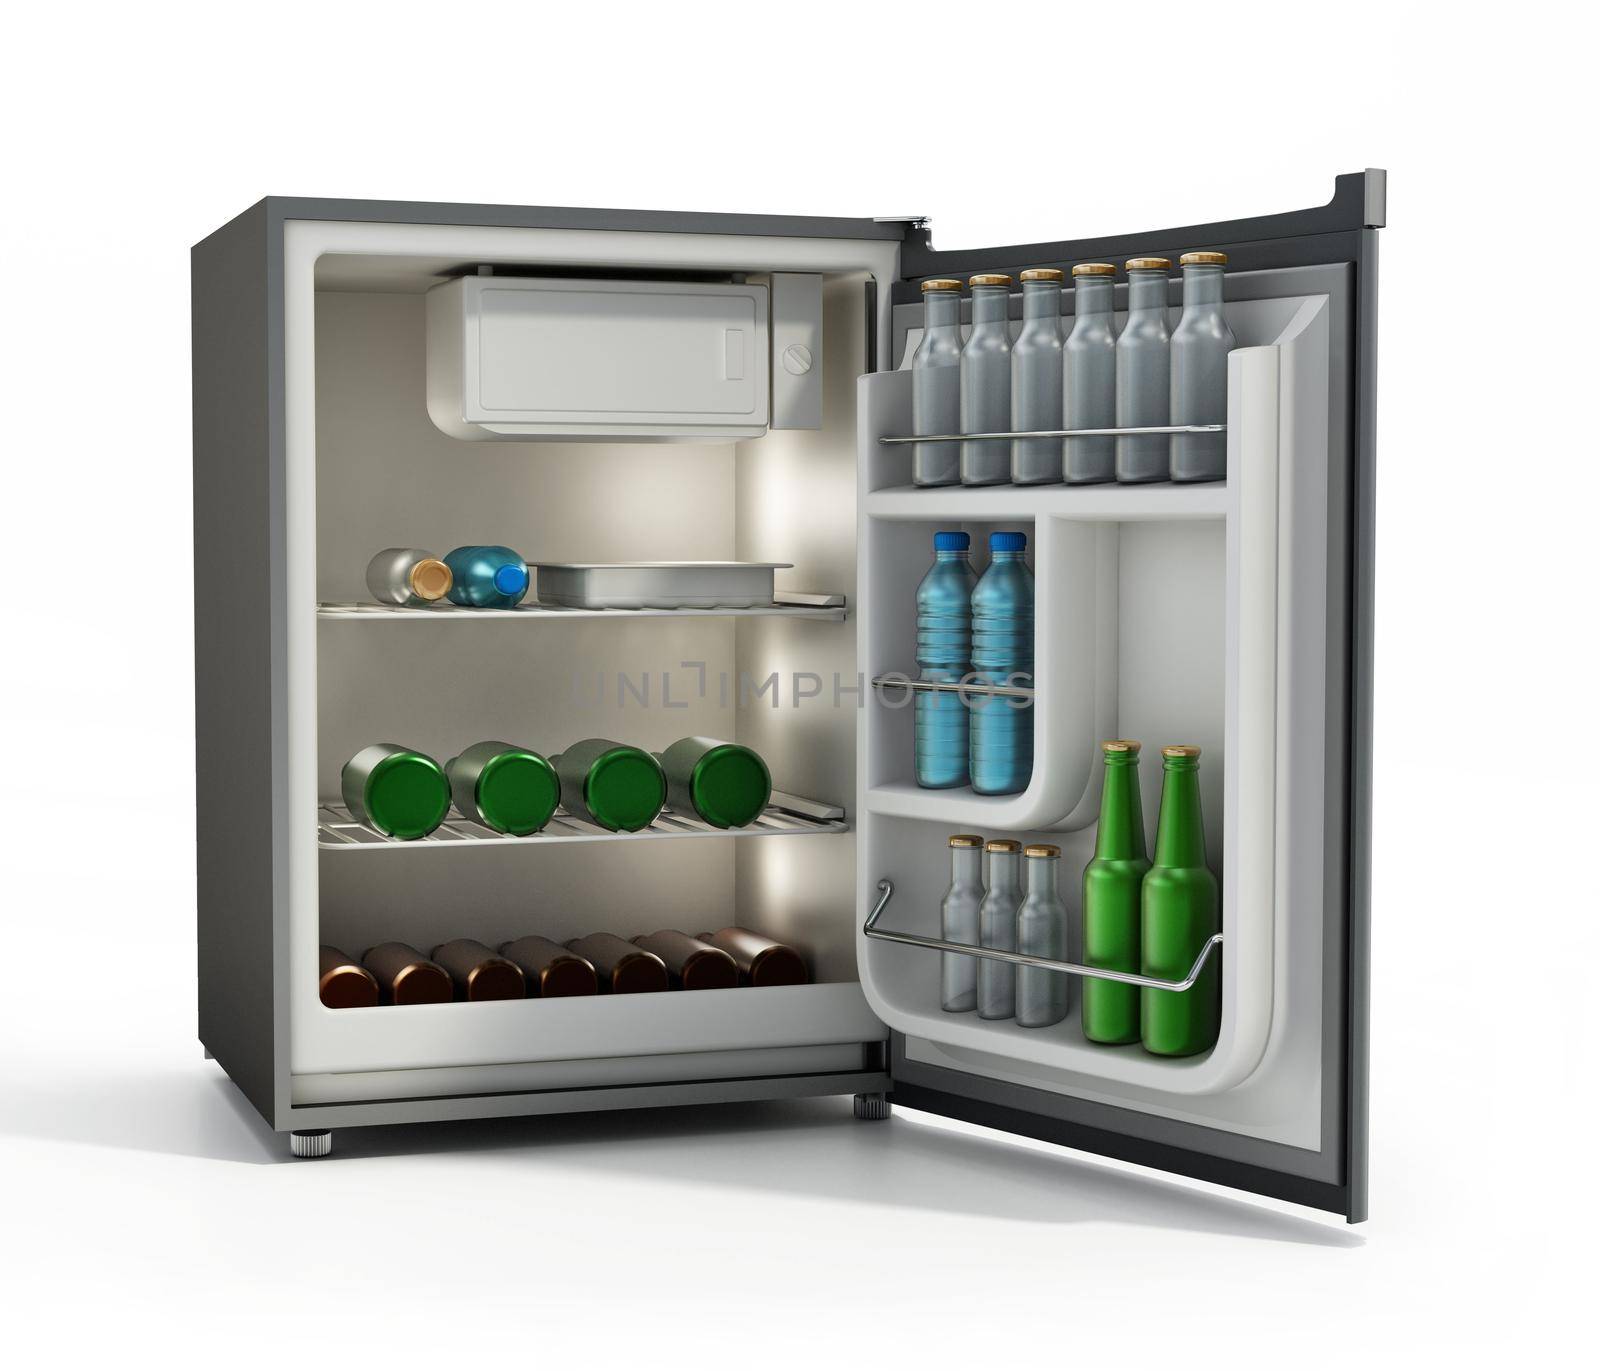 Mini refrigerator full of beverages isolated on white background. 3D illustration by Simsek